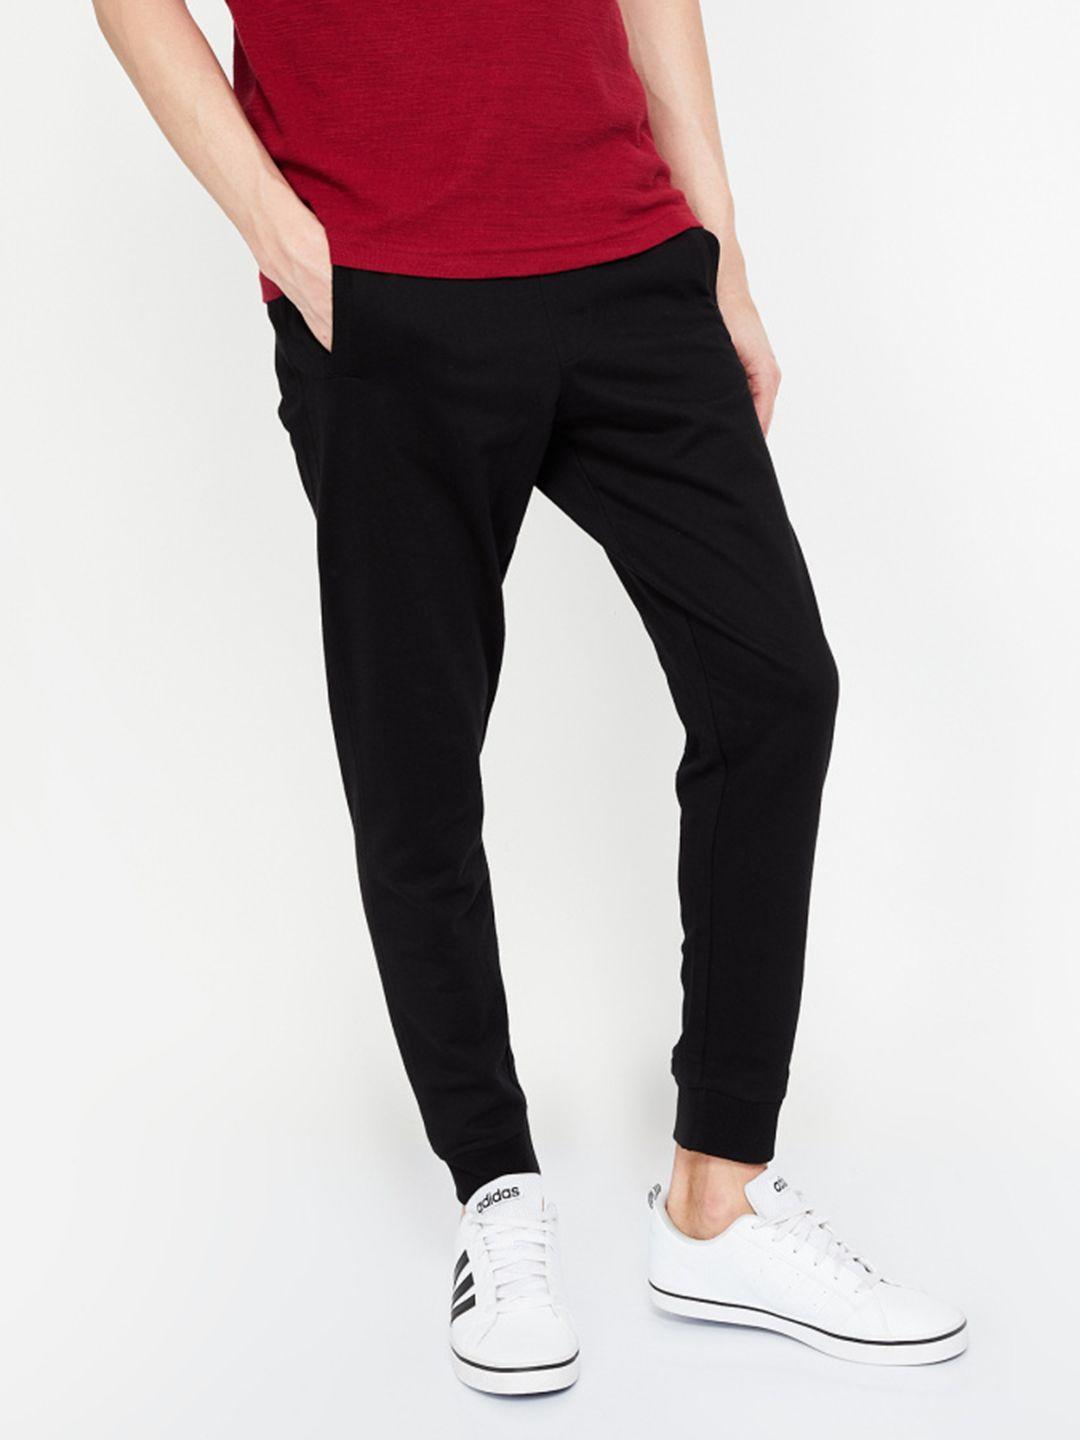 fame-forever-by-lifestyle-men-black-solid-slim-fit-joggers